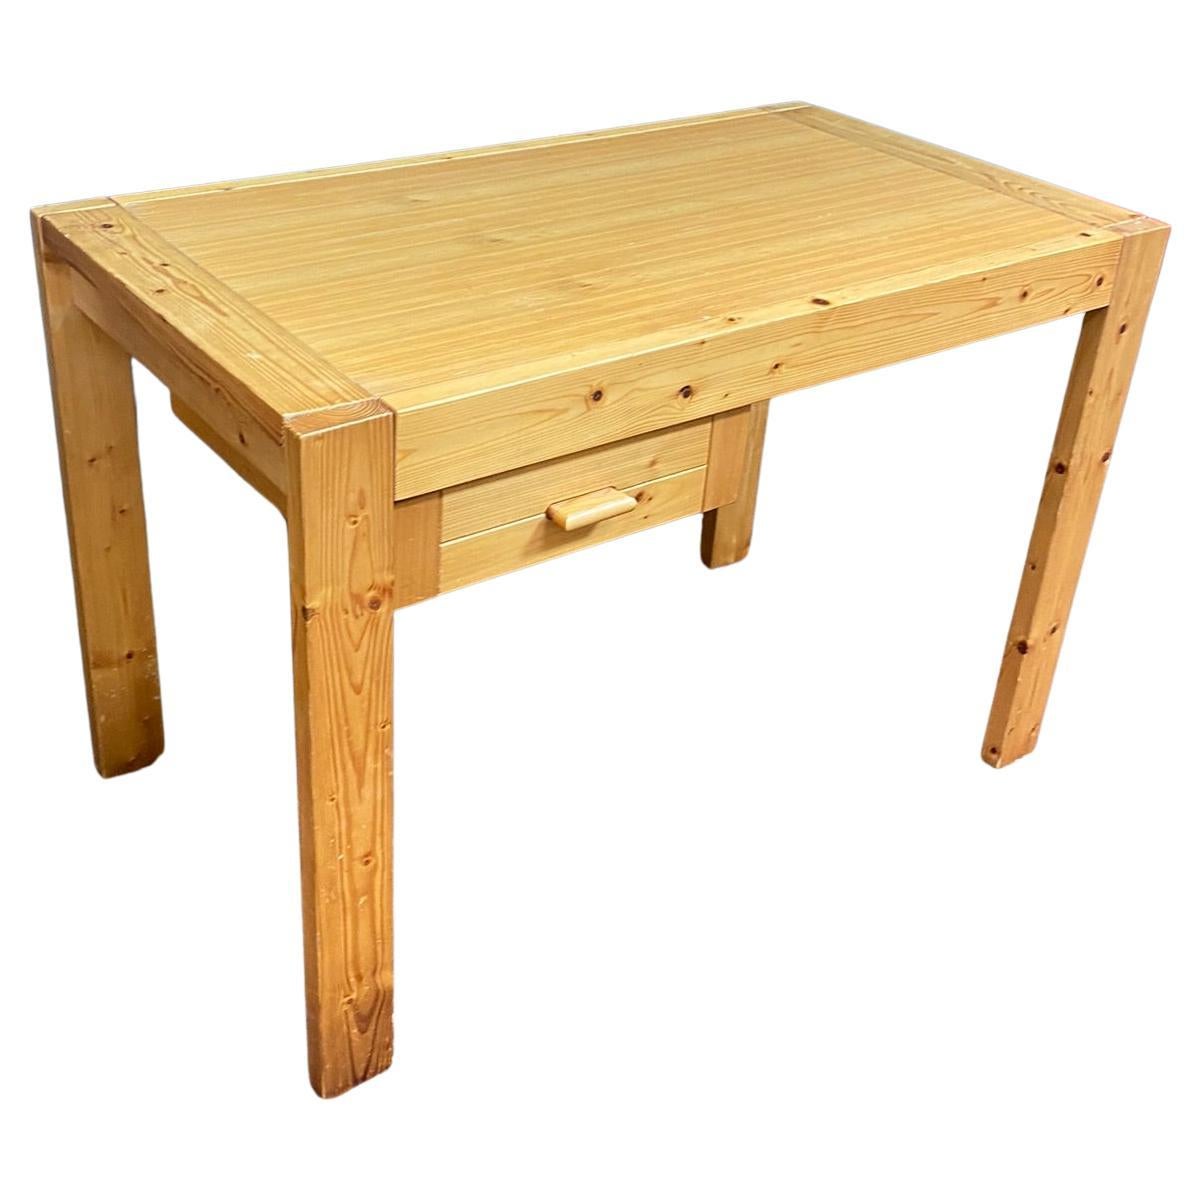 Small Pine Desk Table in the "Les Arcs" Style, Charlotte Perriand, circa 1950 For Sale